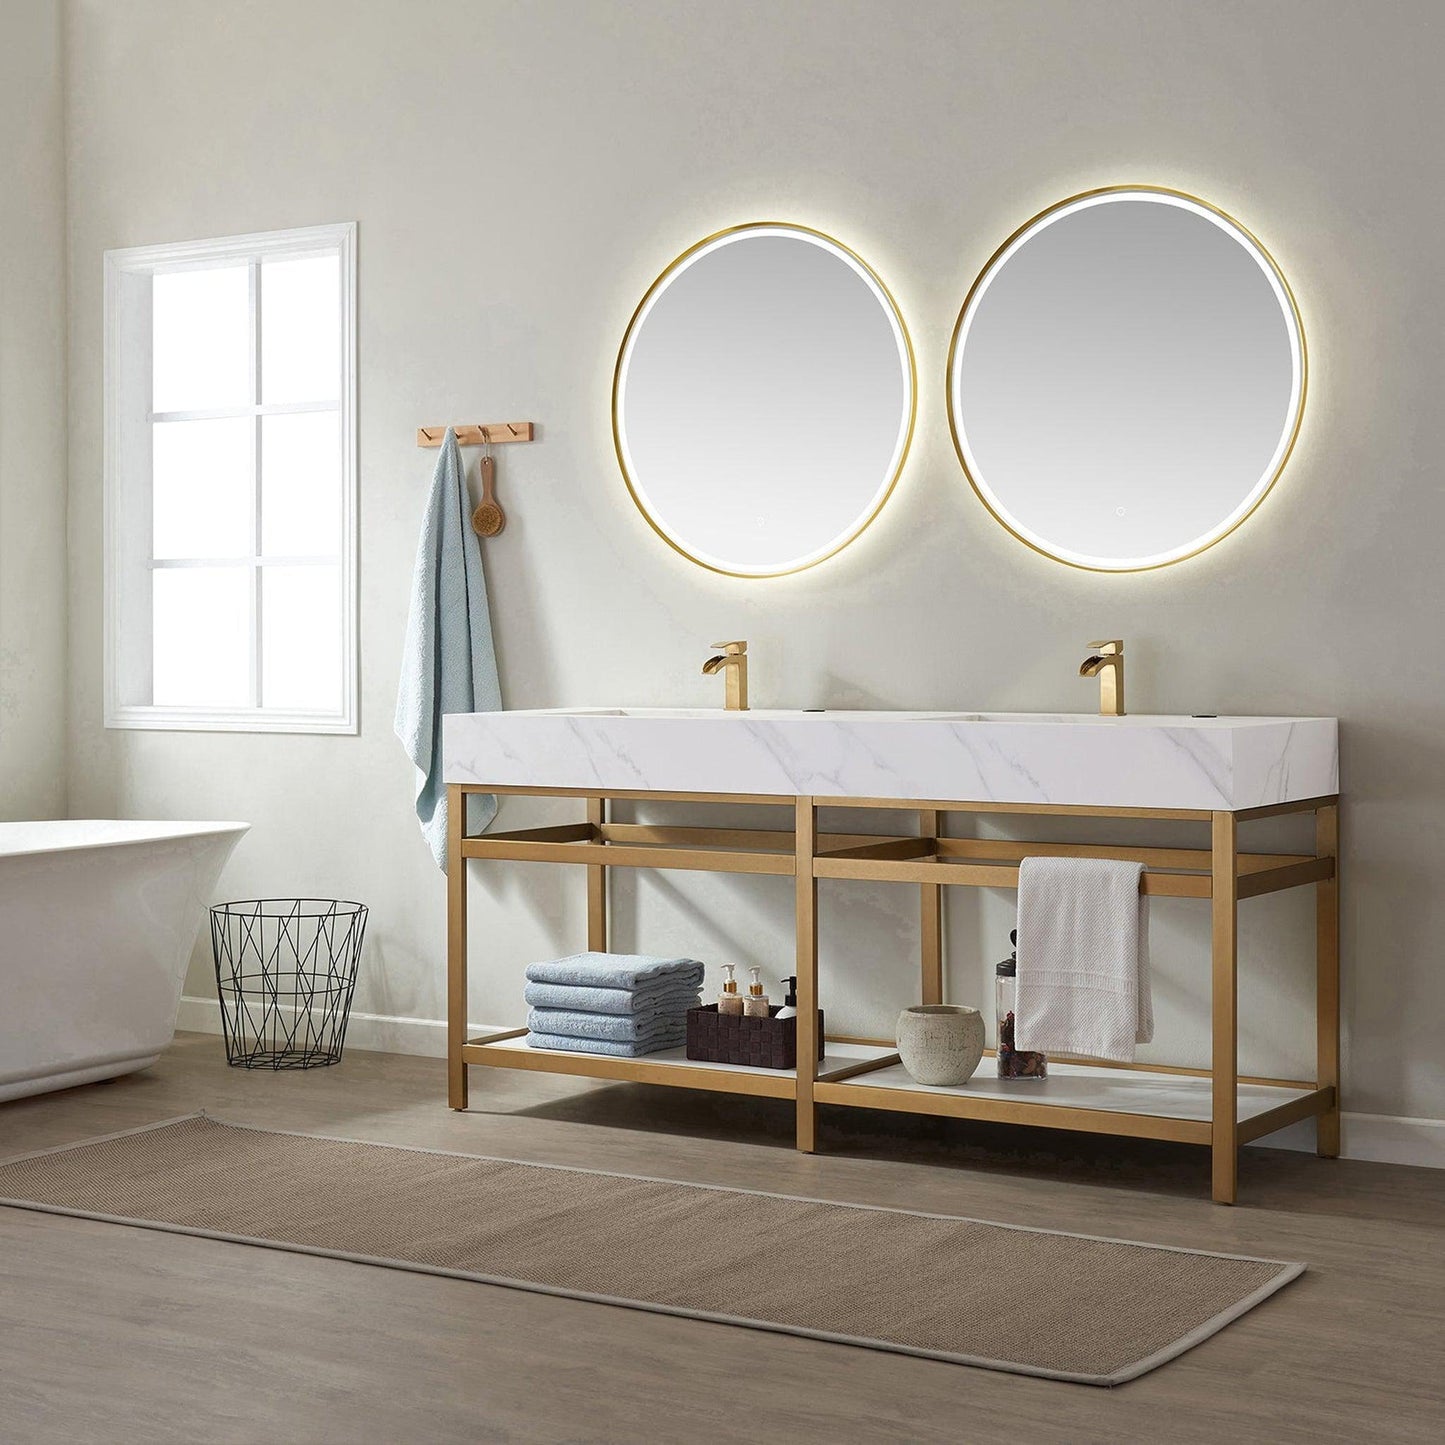 Vinnova Bilbao 72" Double Vanity With Brushed Gold Stainless Steel Bracket Match With Snow Mountain White Stone Countertop With Mirror